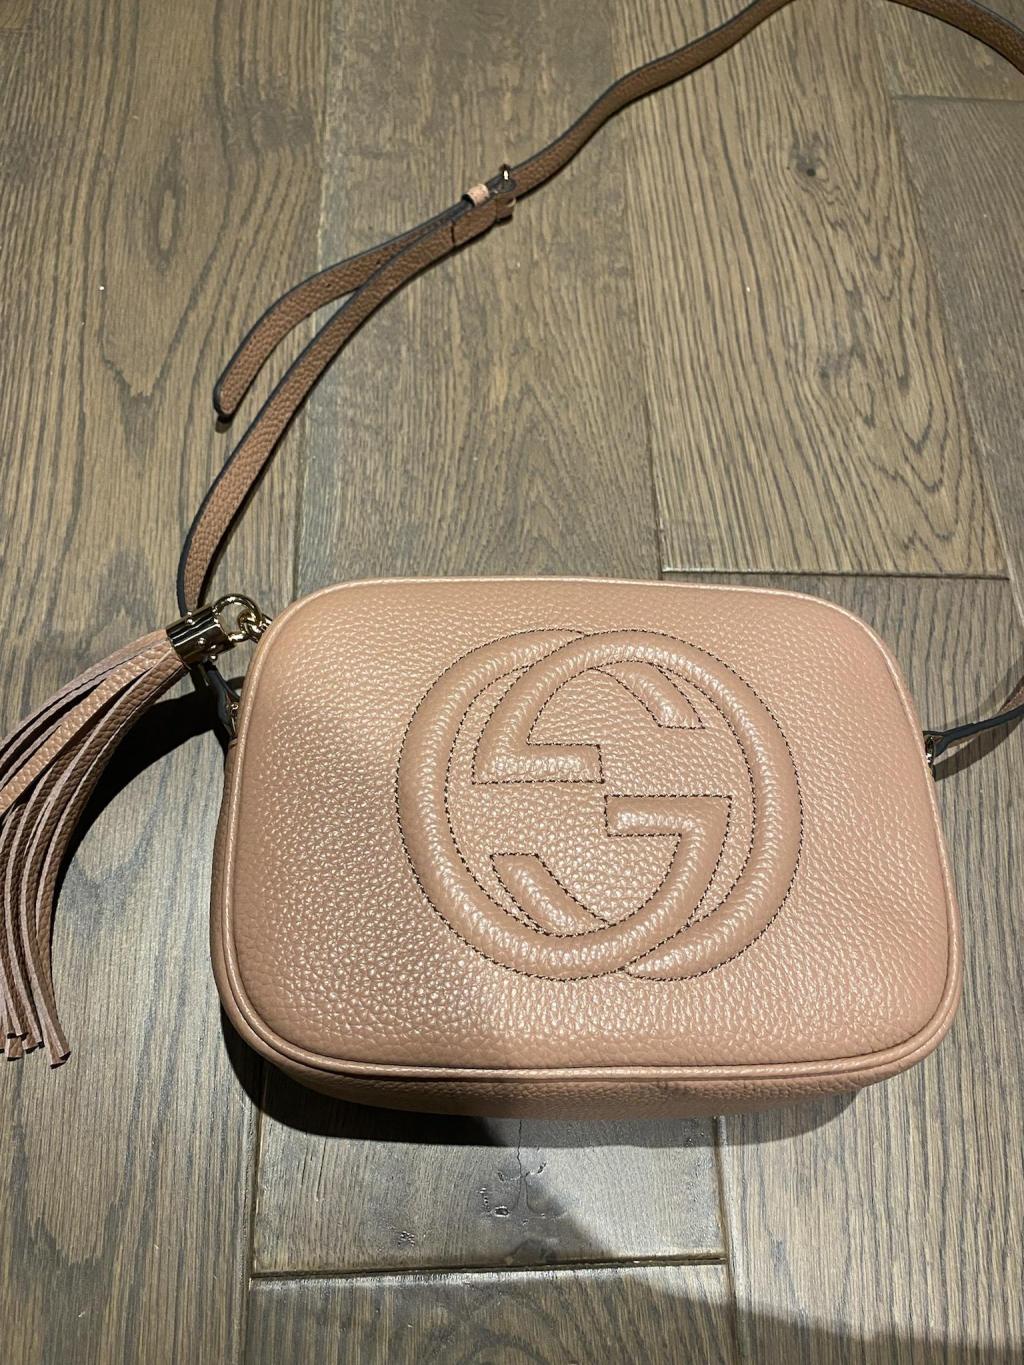 [Review] Gucci Disco Soho From Unknow Factory